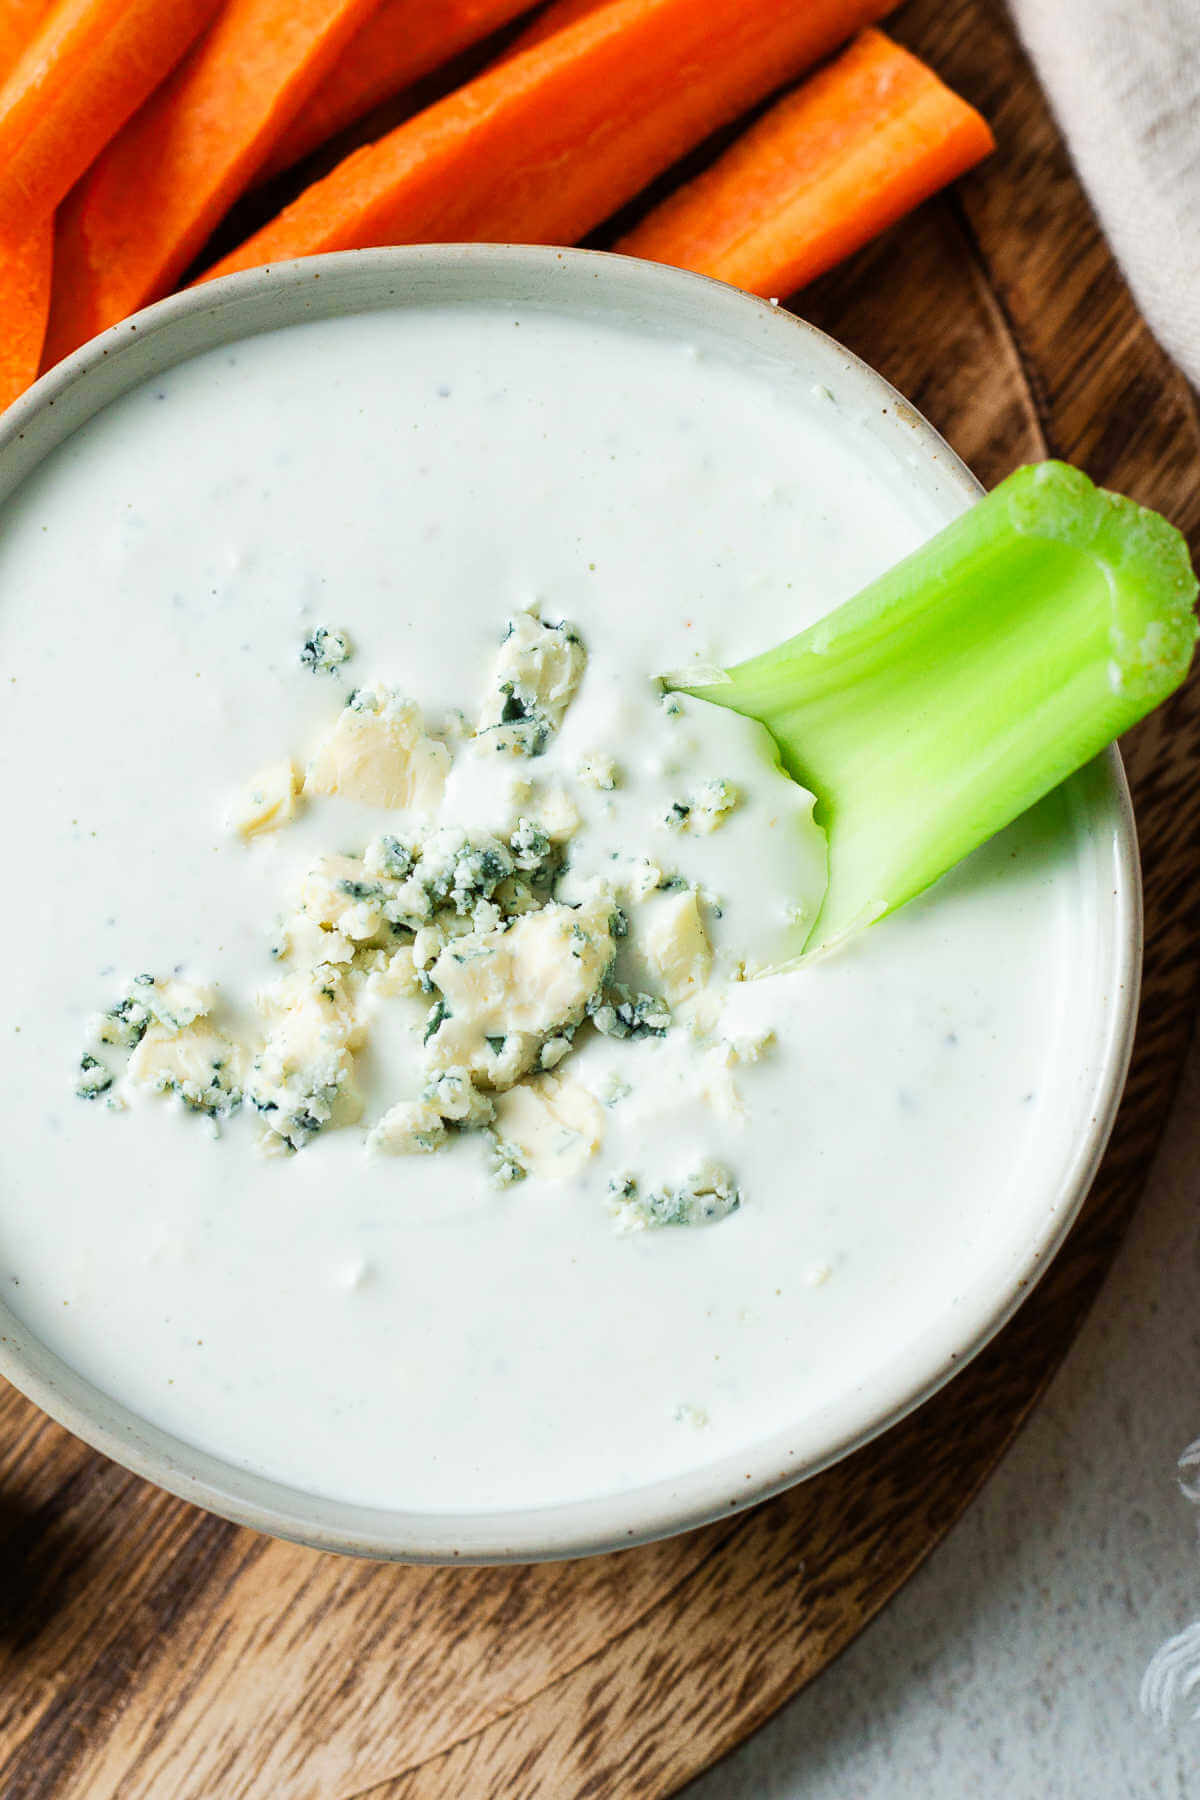 A celery stick dunked into a bowl of blue cheese dressing.